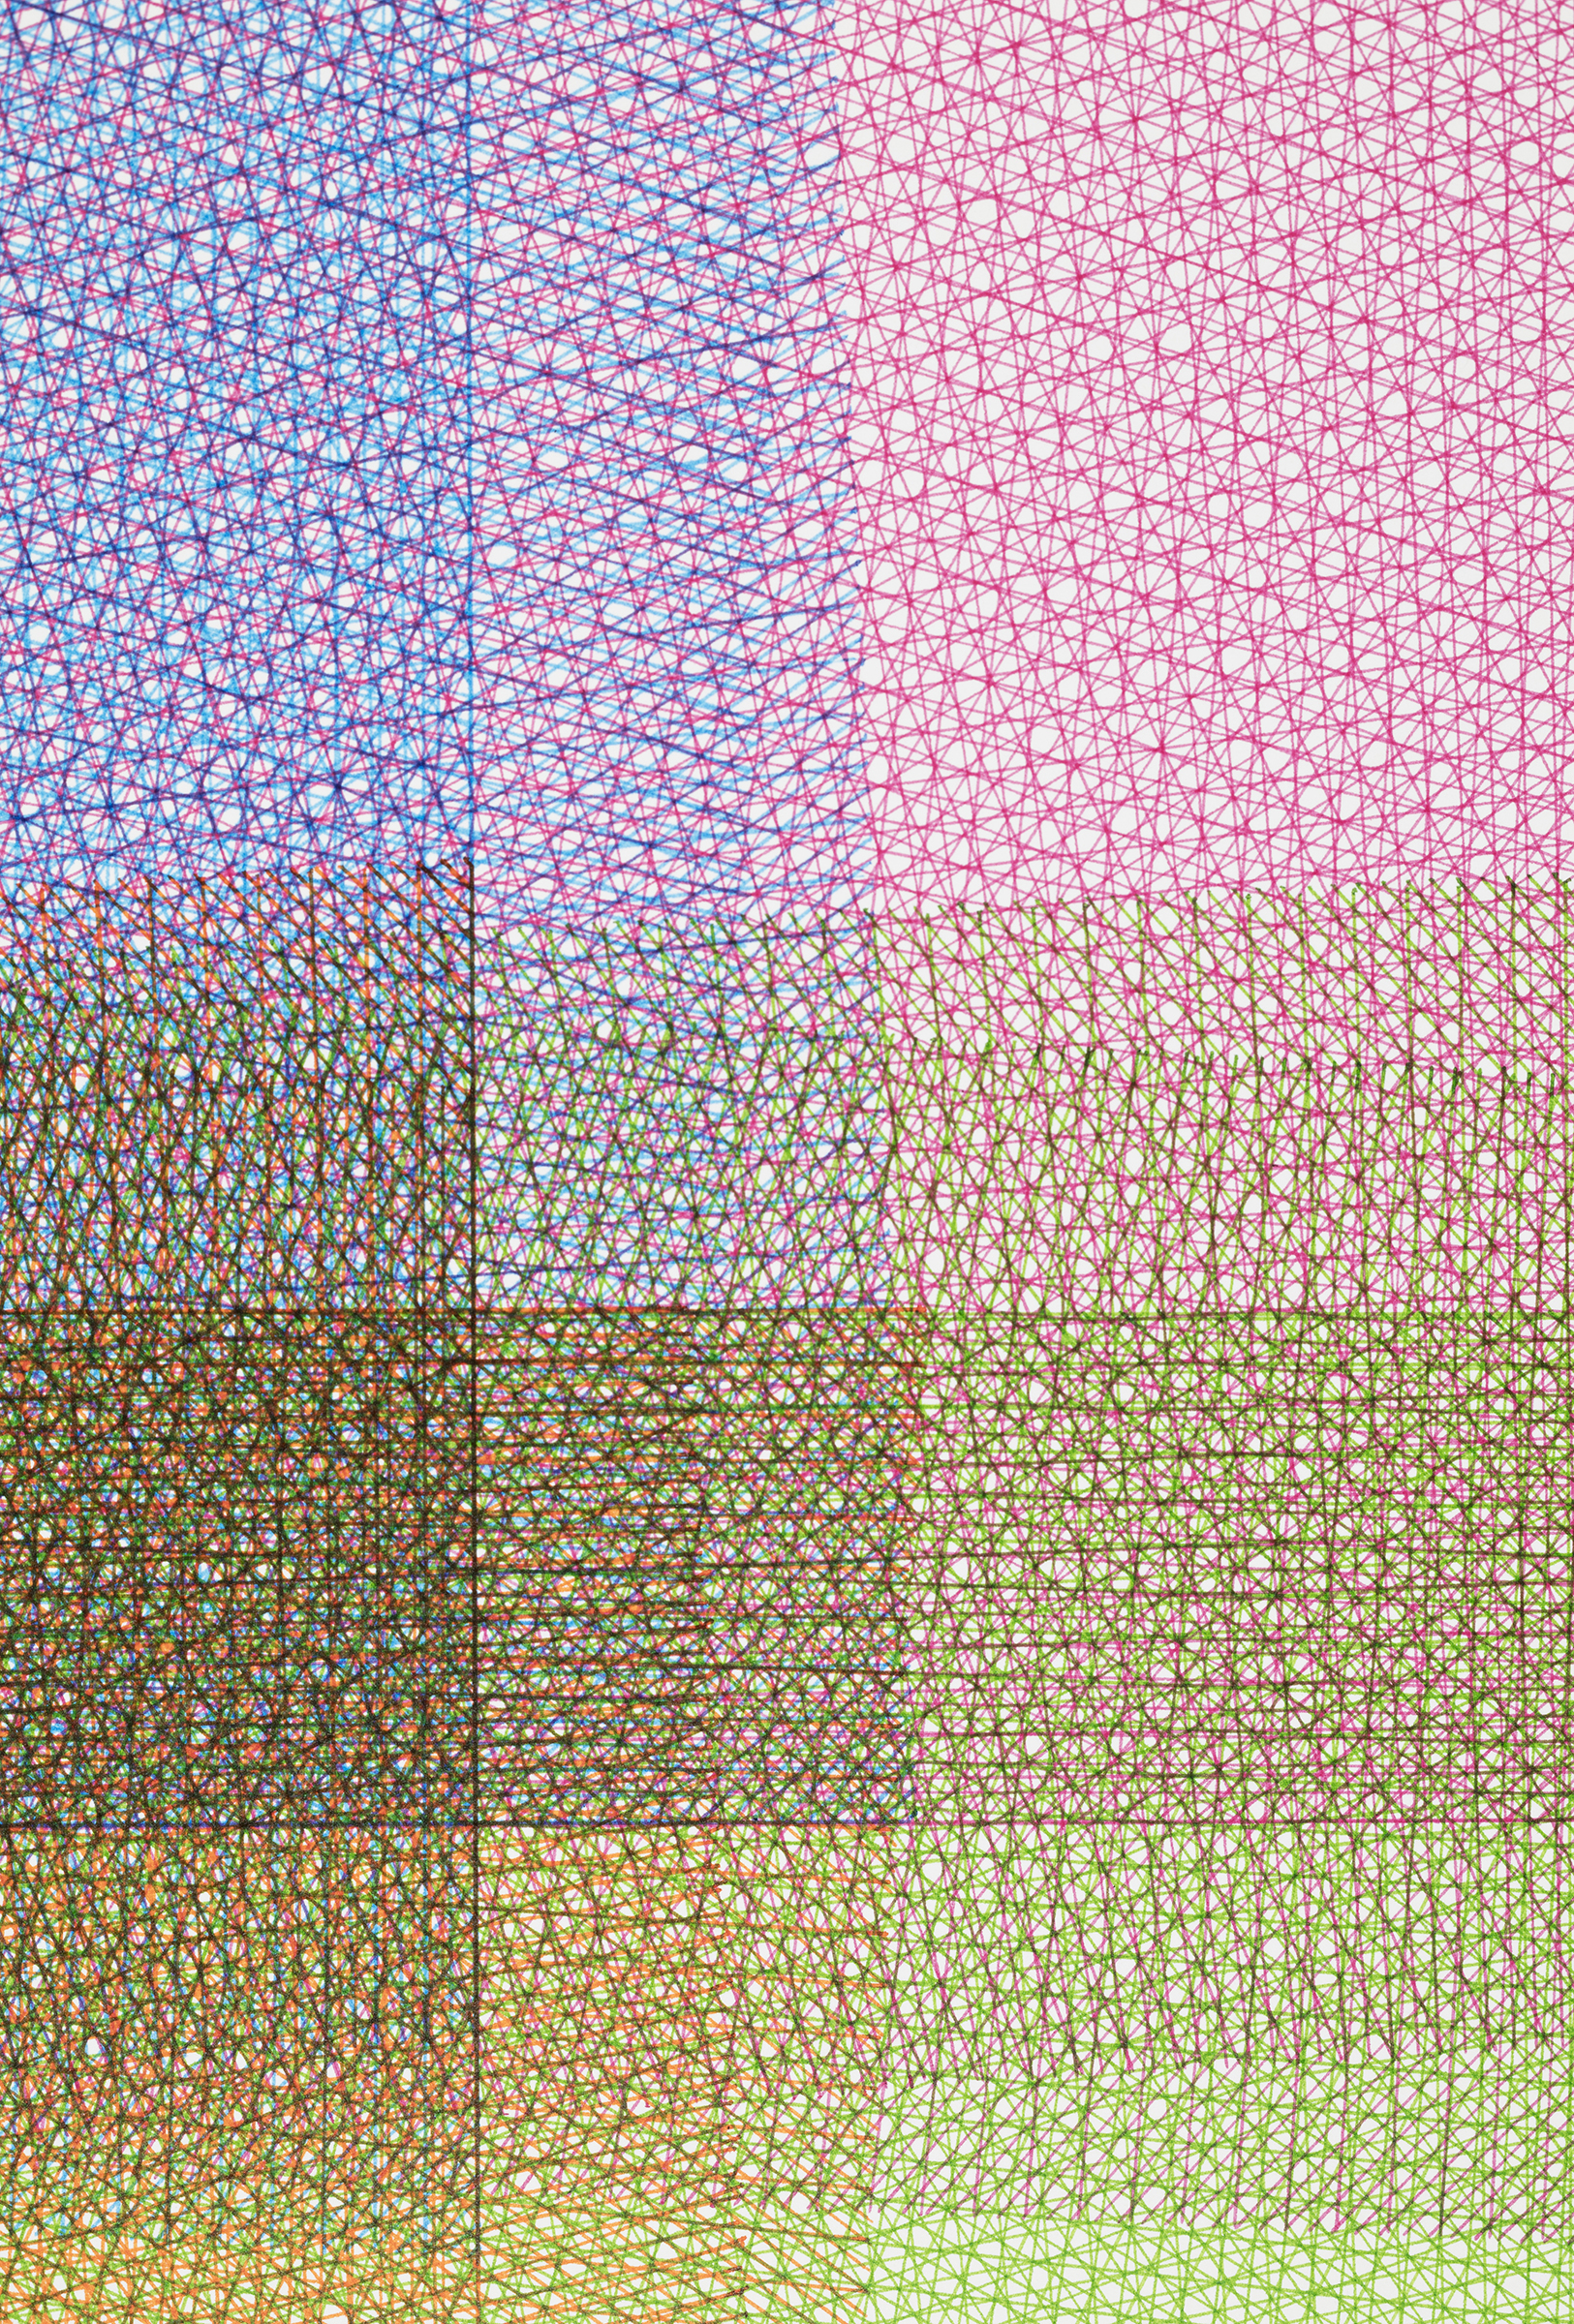 Detail: 32 layers, four-color, rectangle, 40 x 30 inches, 2016